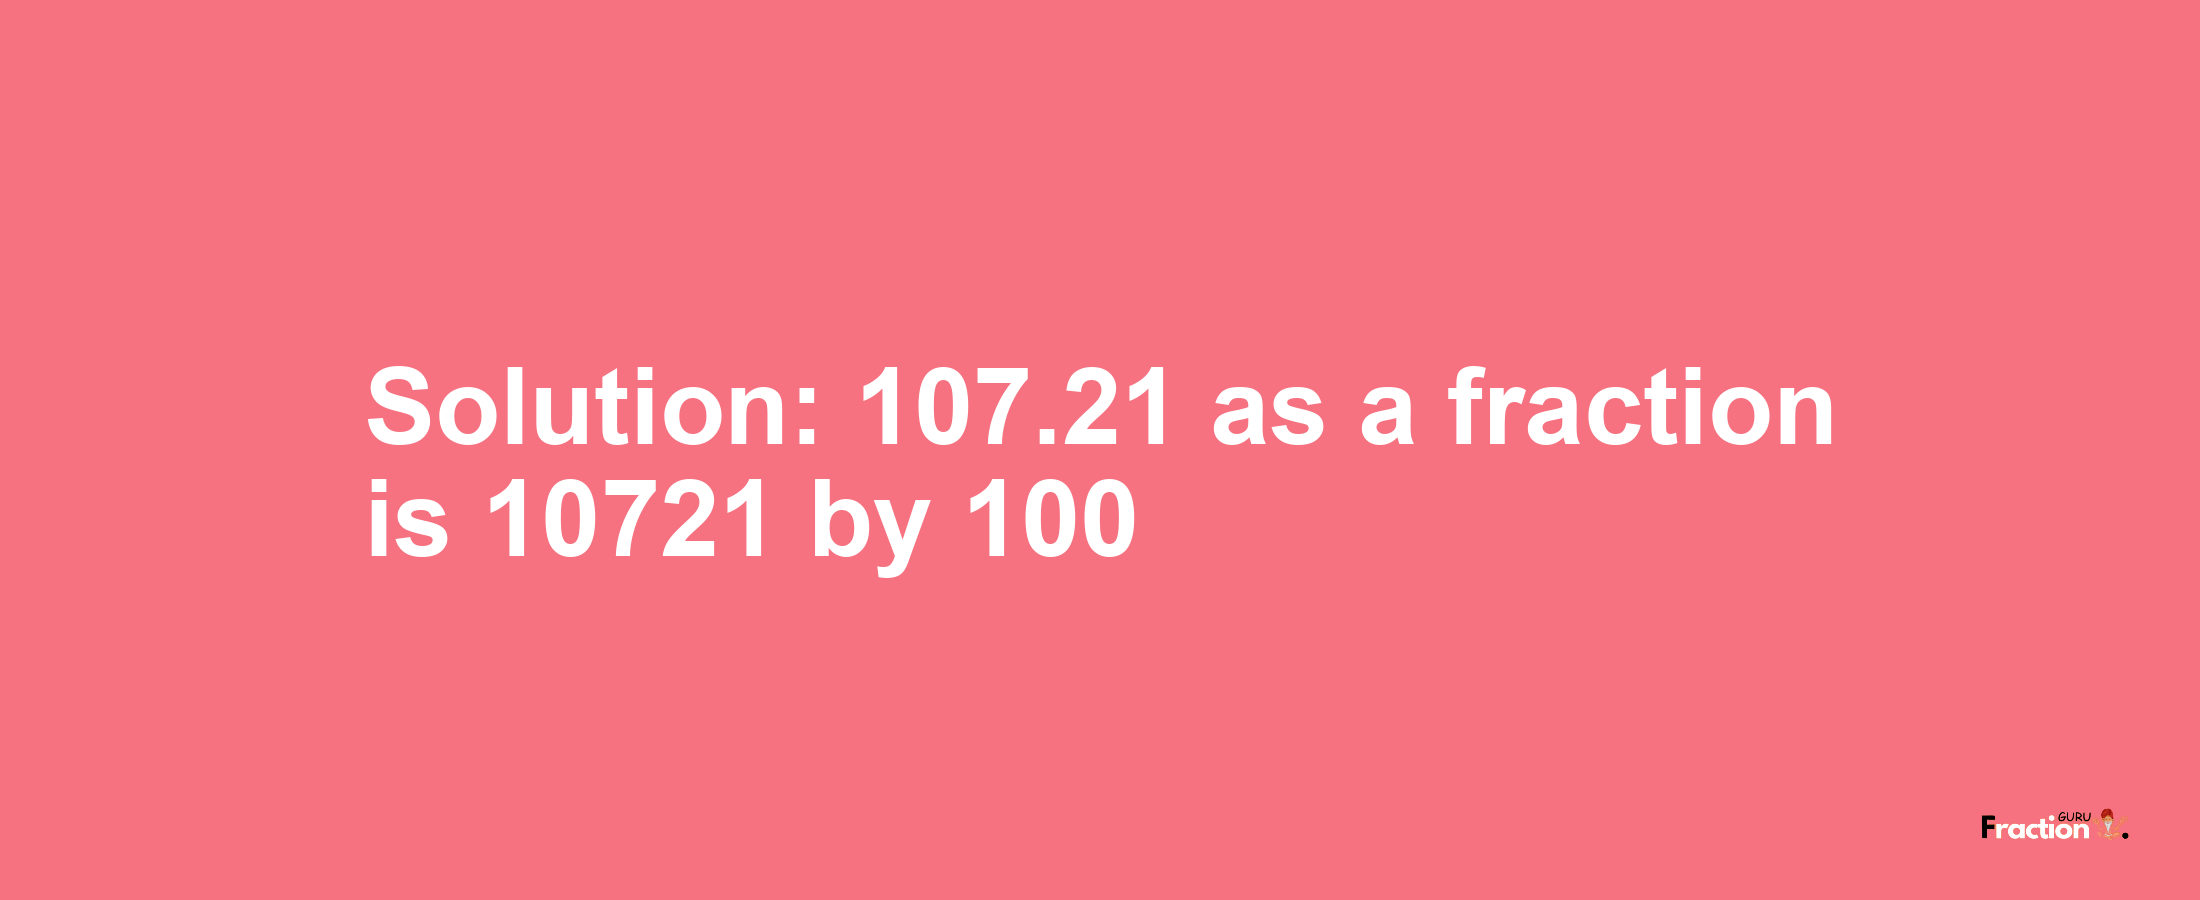 Solution:107.21 as a fraction is 10721/100